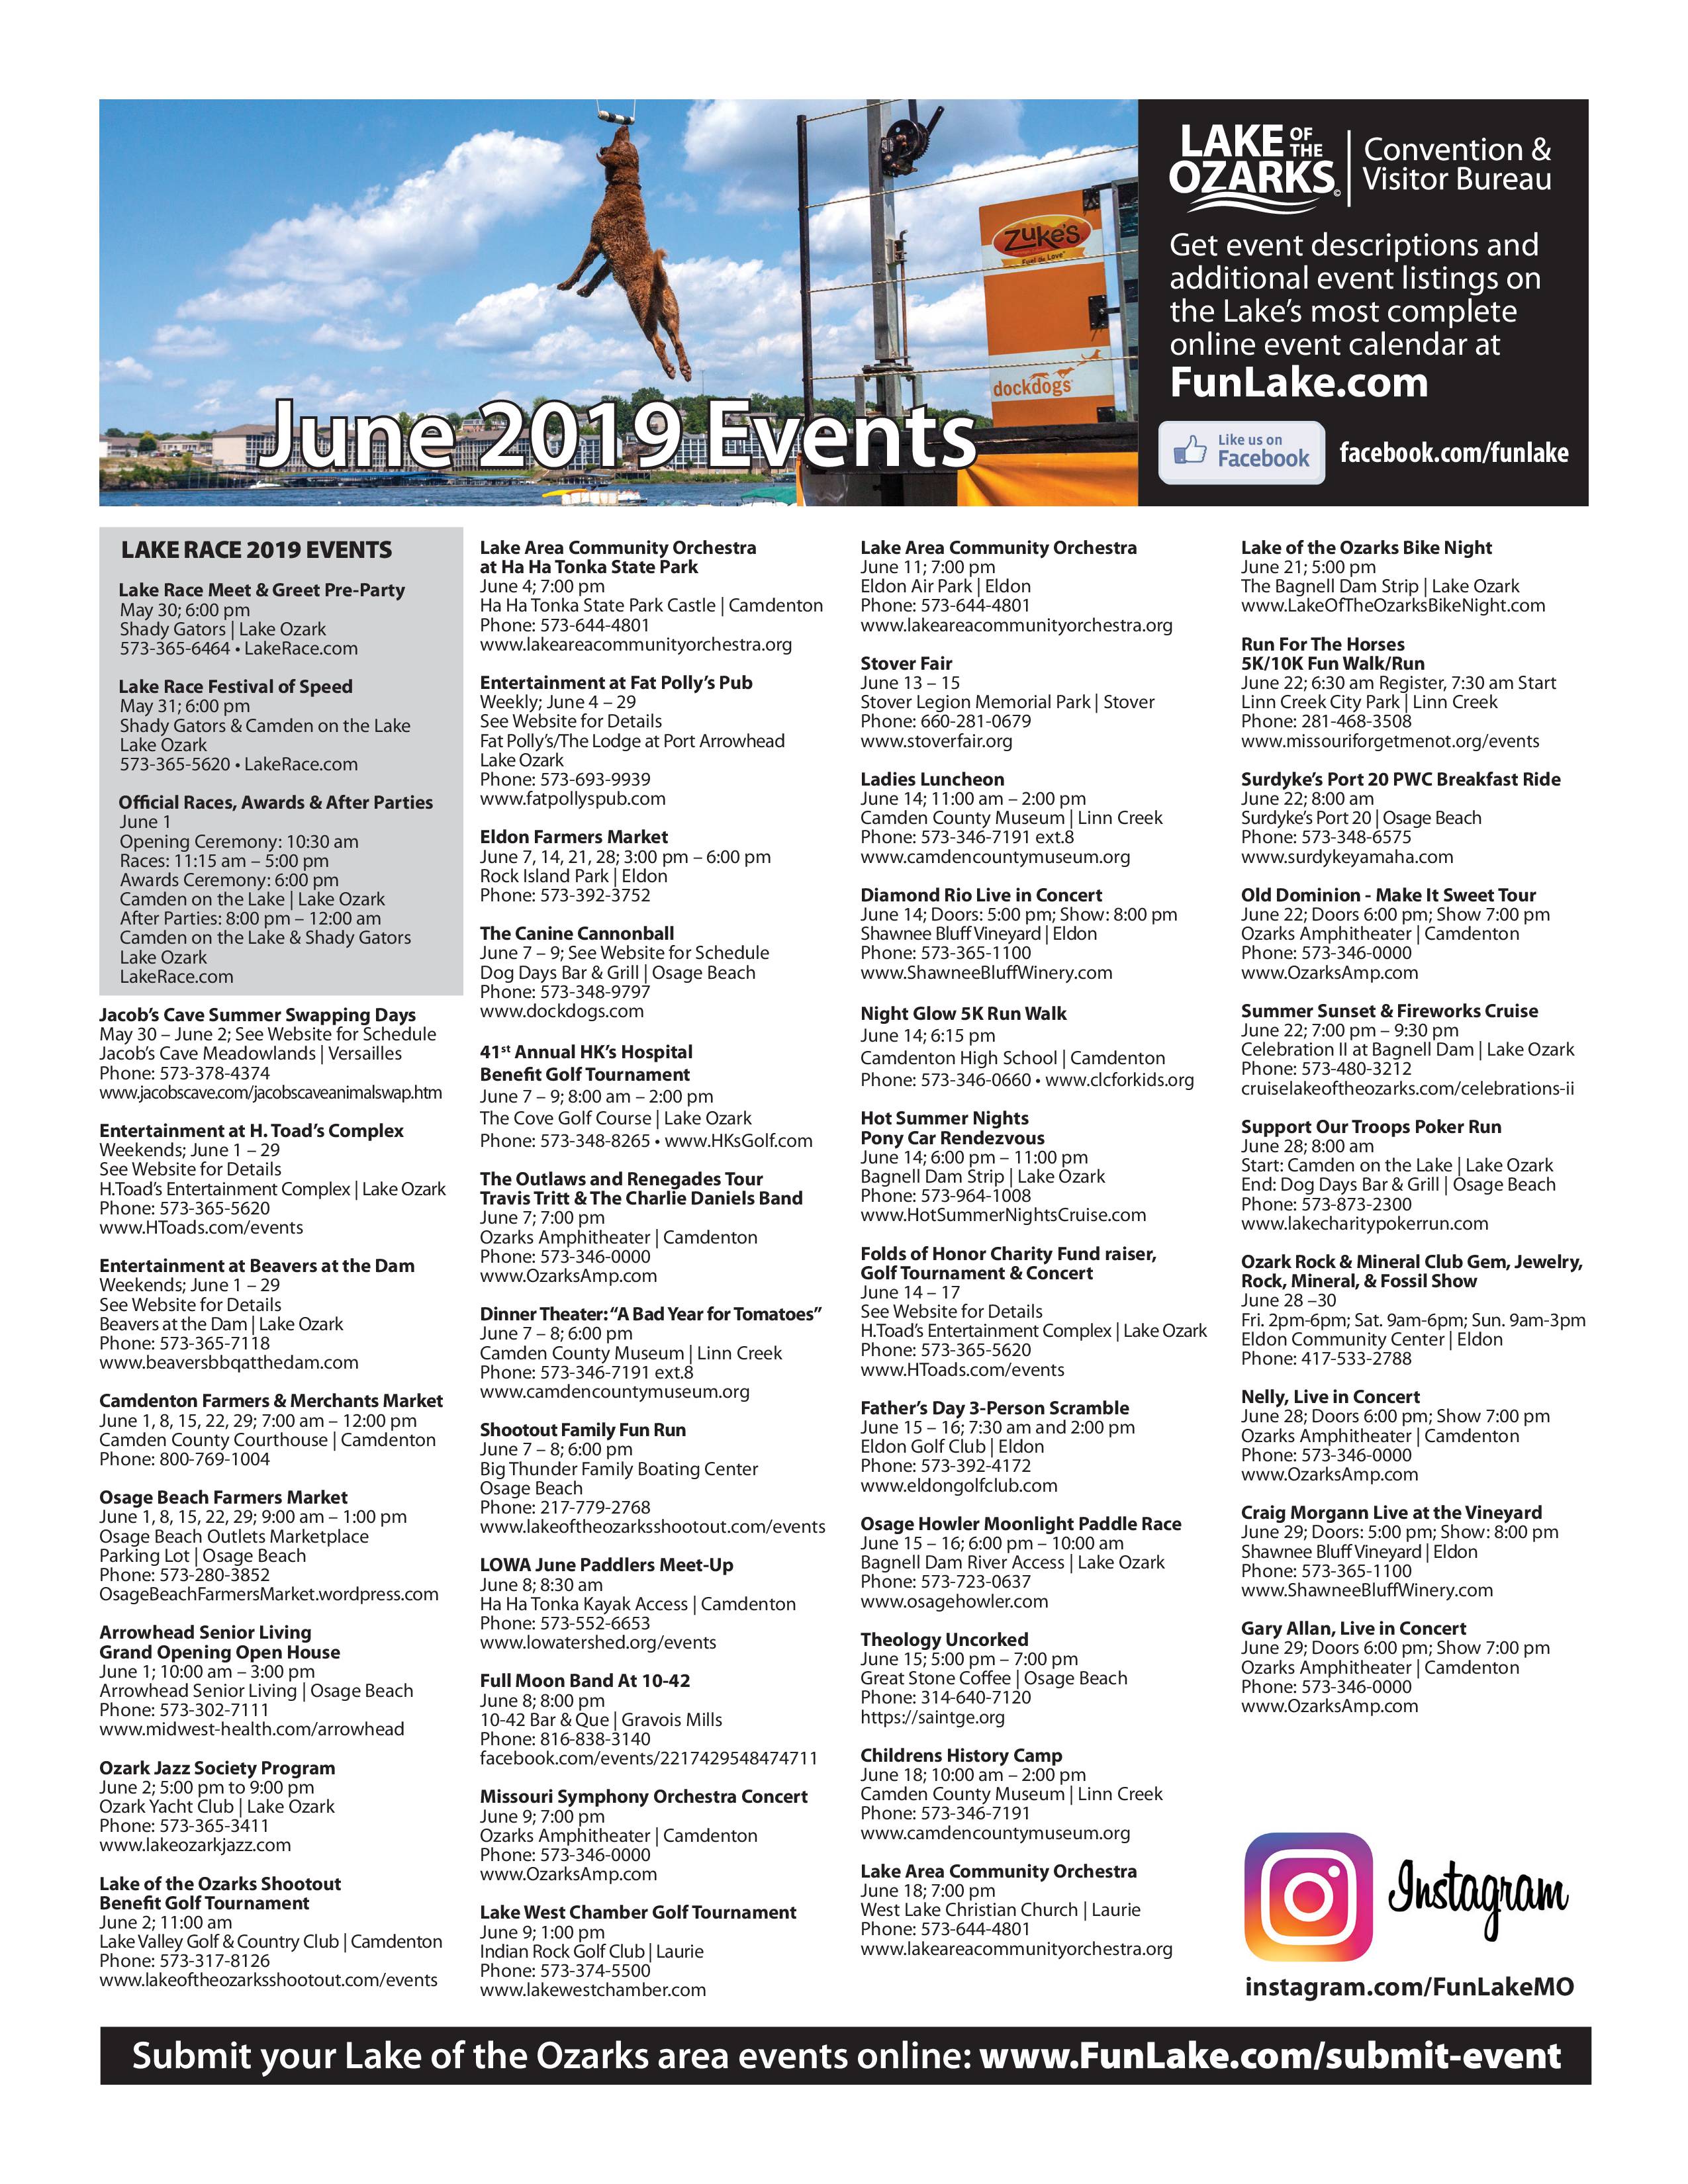 Lake Of The Ozarks Calendar Of Events 2022 Lake Of The Ozarks June Events Calendar – G And G Marina